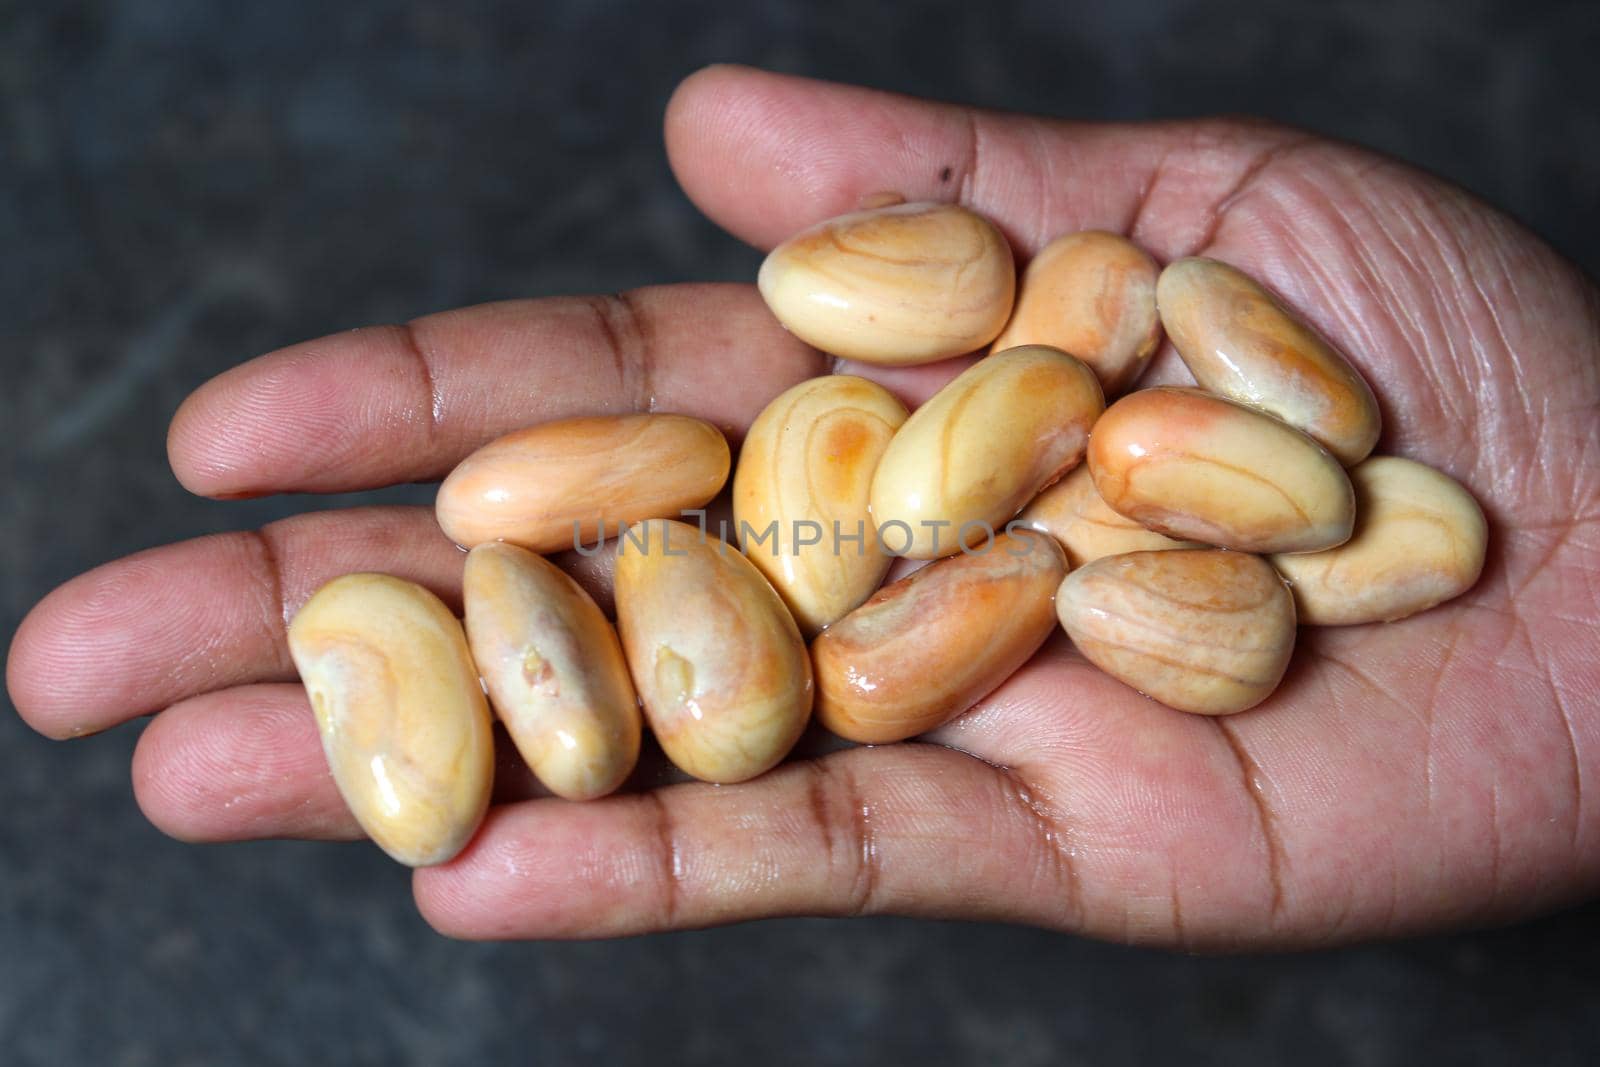 jackfruit seeds on hand for cooking by jahidul2358